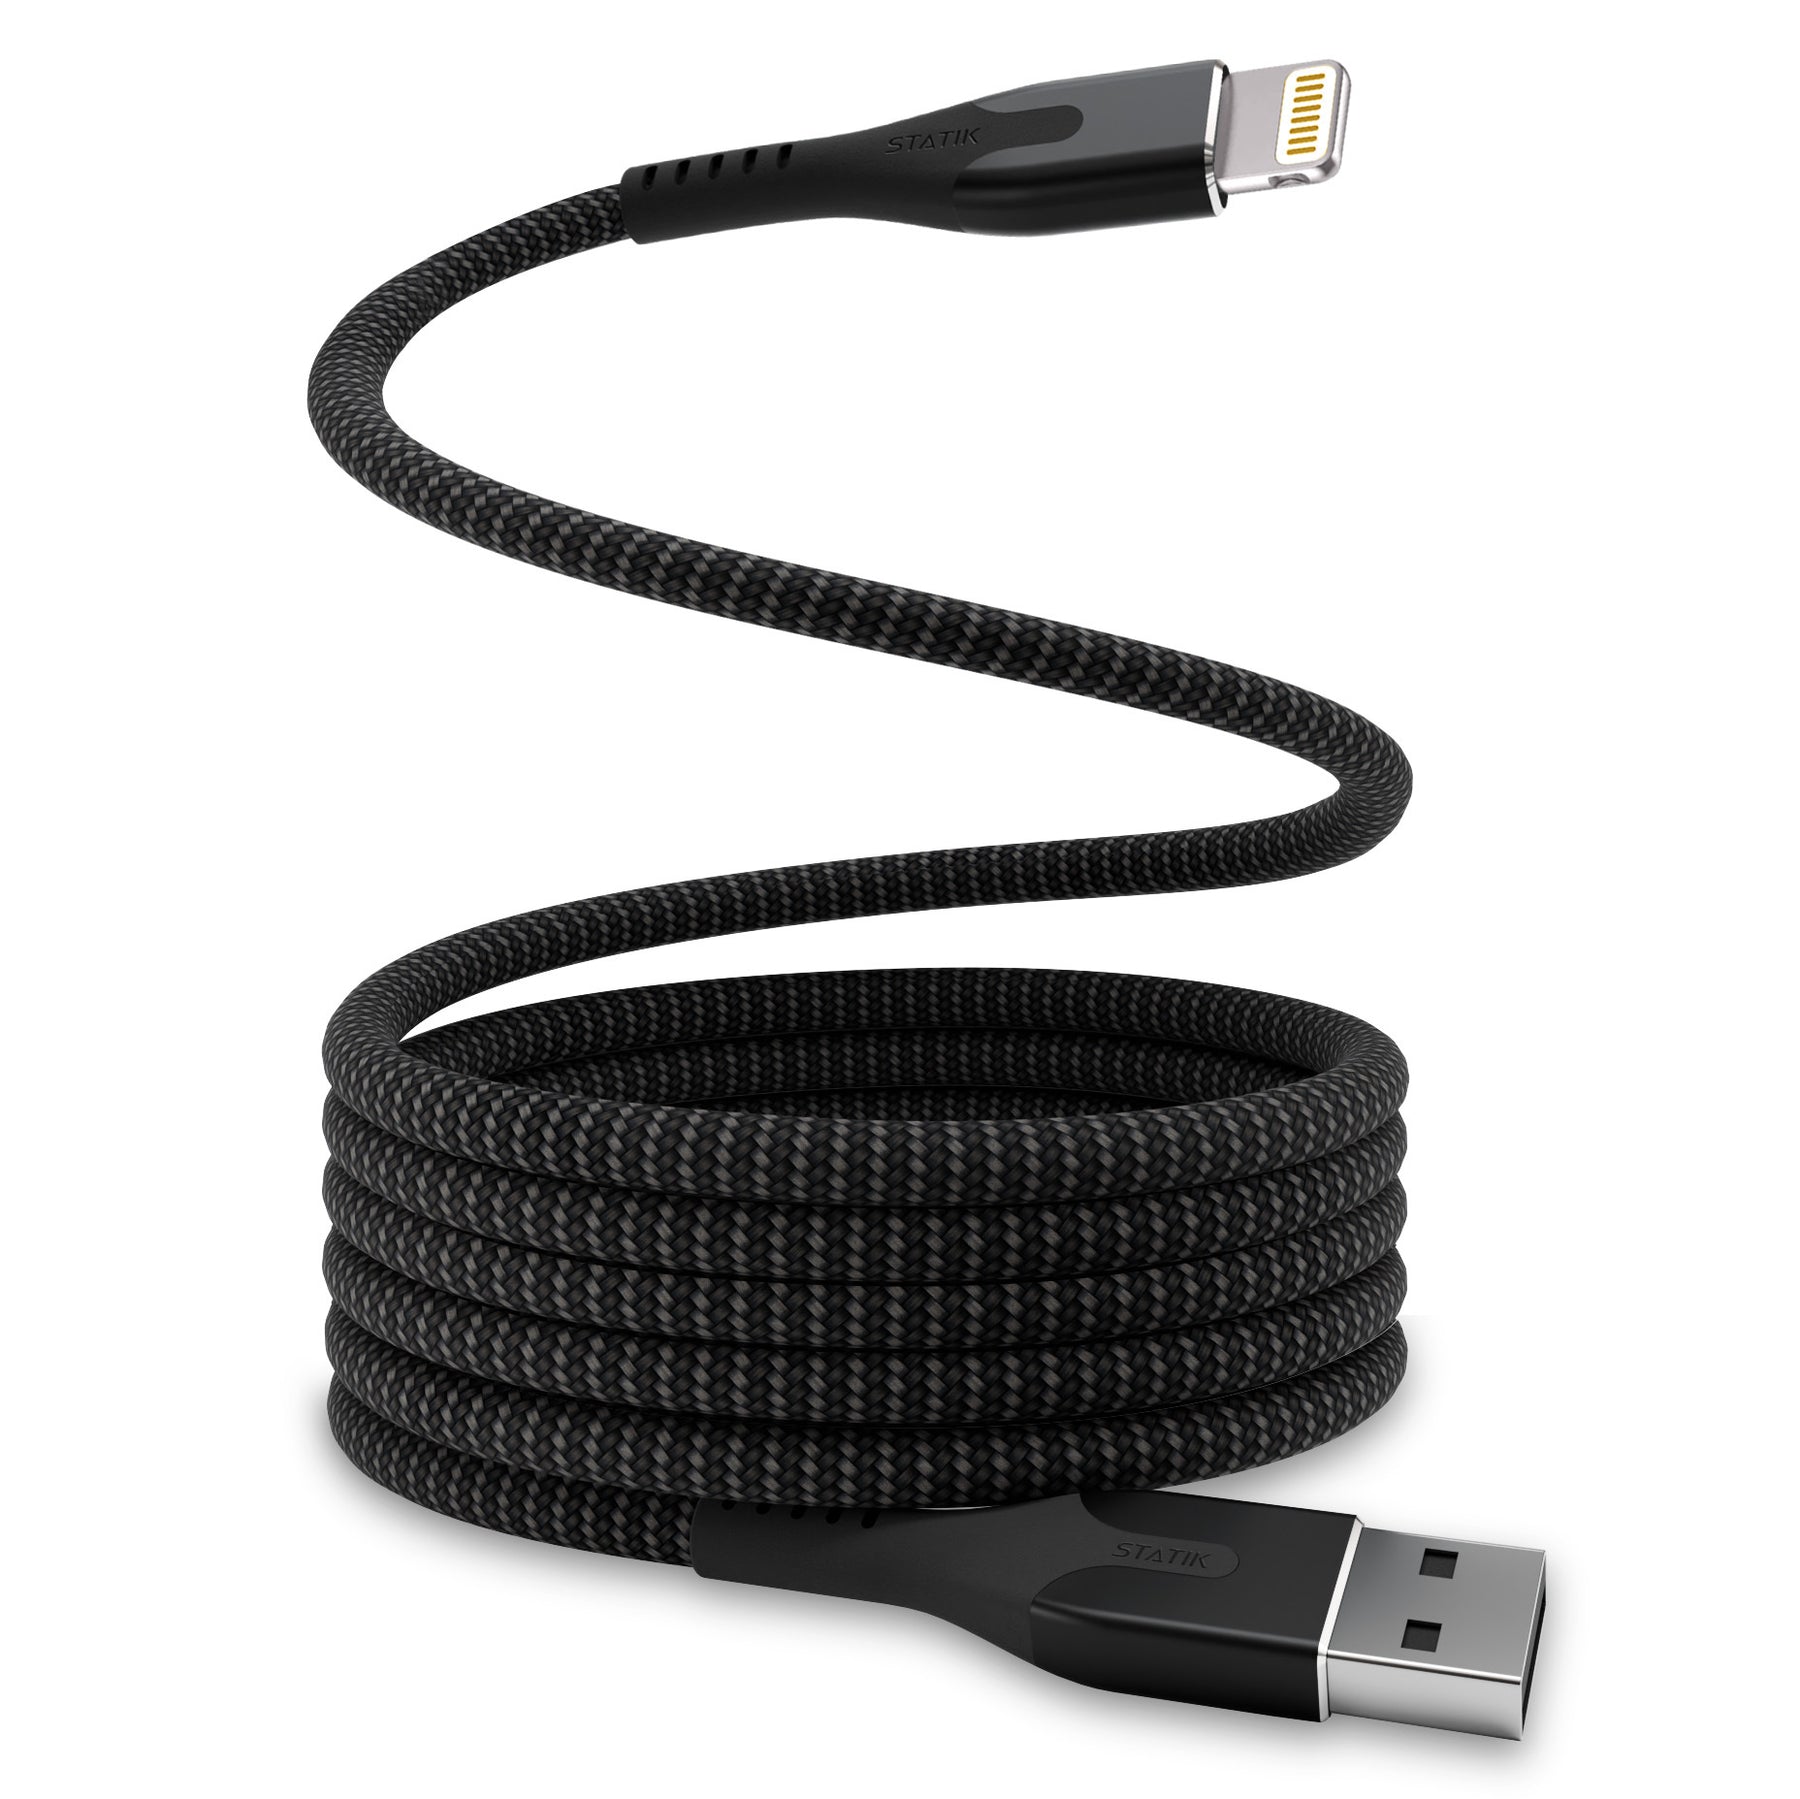 MagStack™ Cable | Tangle-Free Magnetic Nylon | Charge & Data Cable